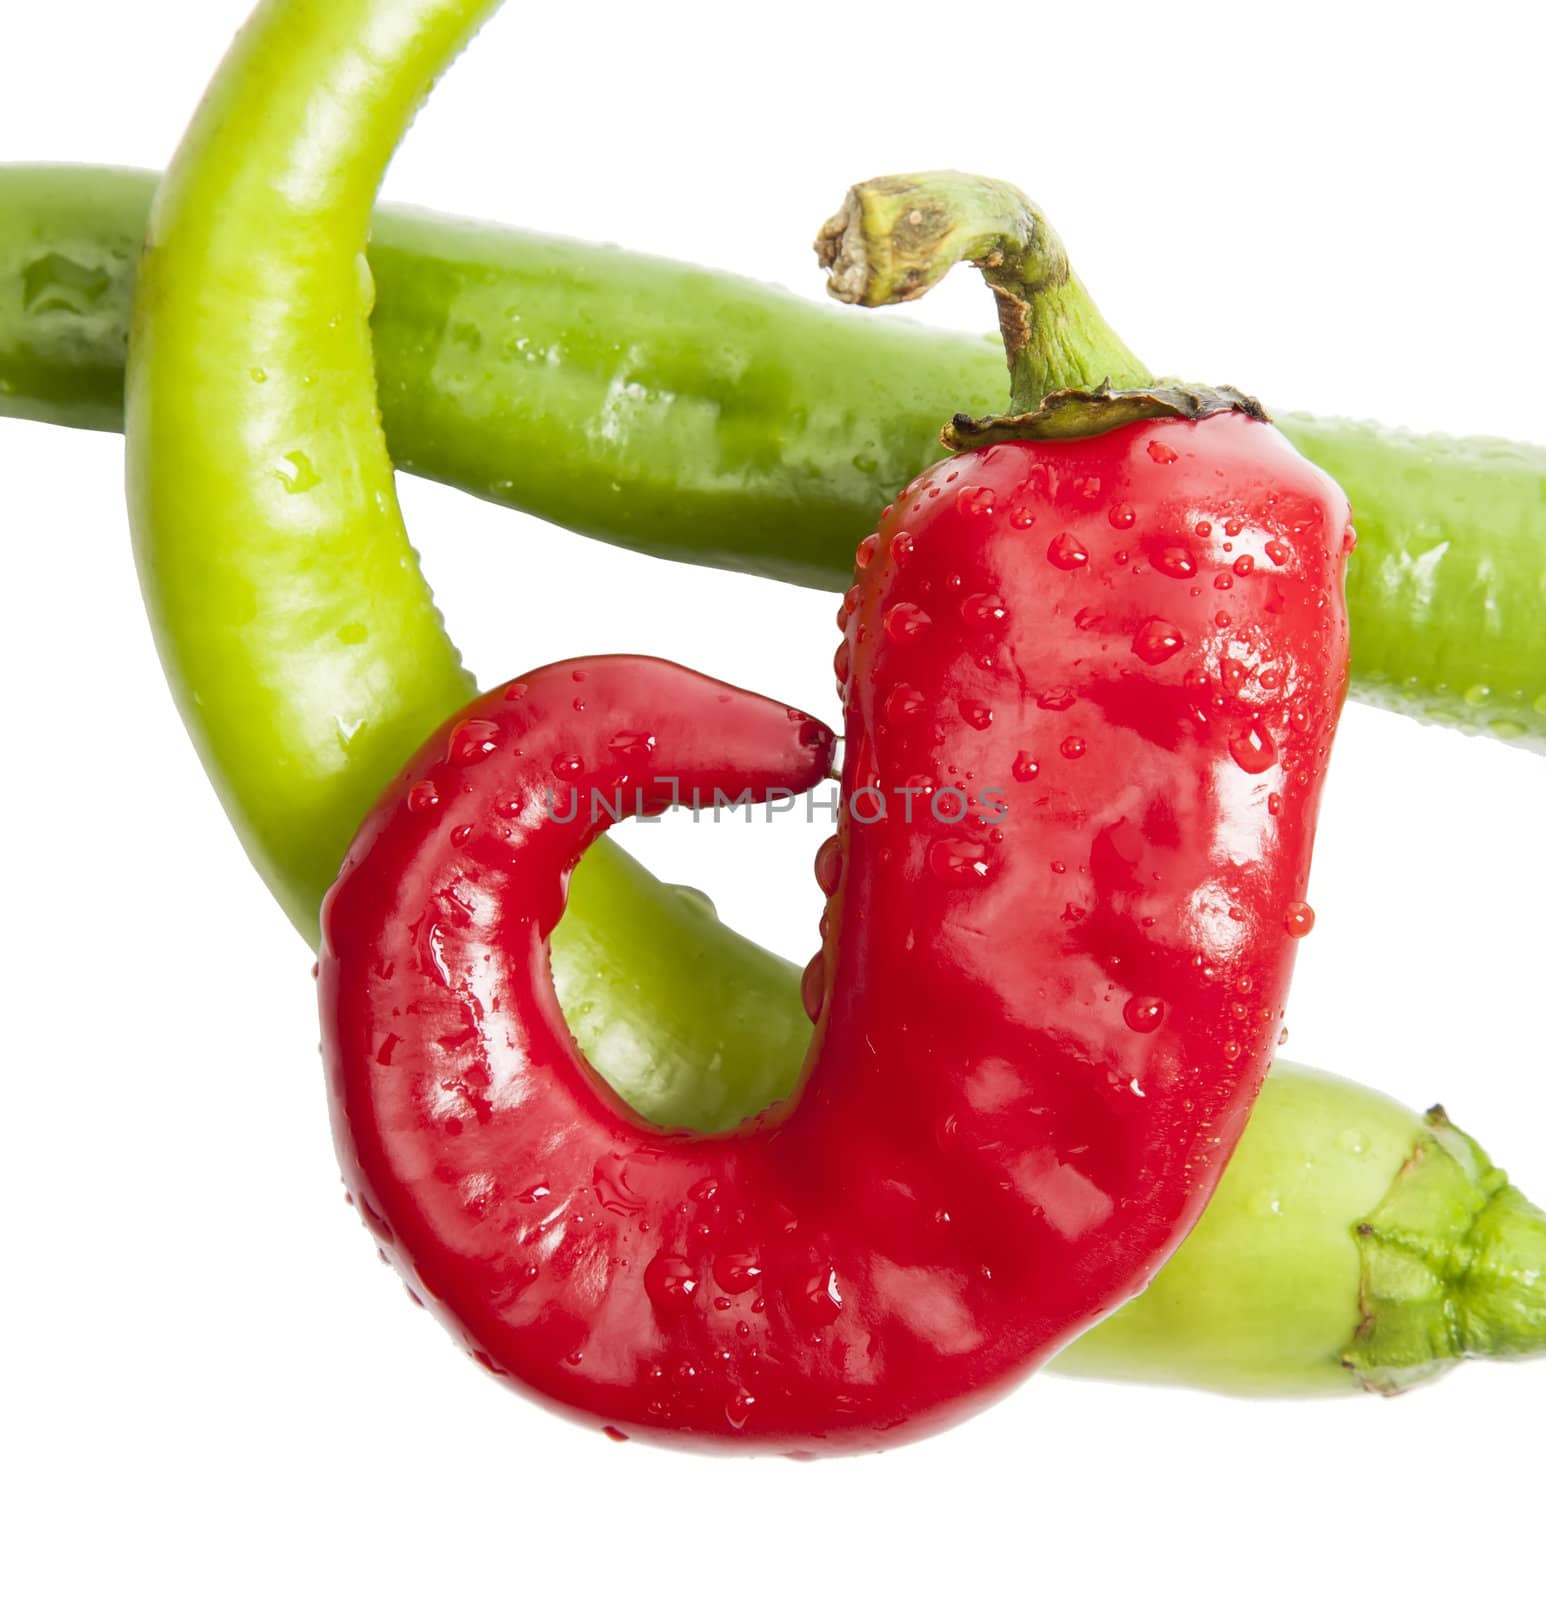 Green and red chili pepper isolated on white by RawGroup